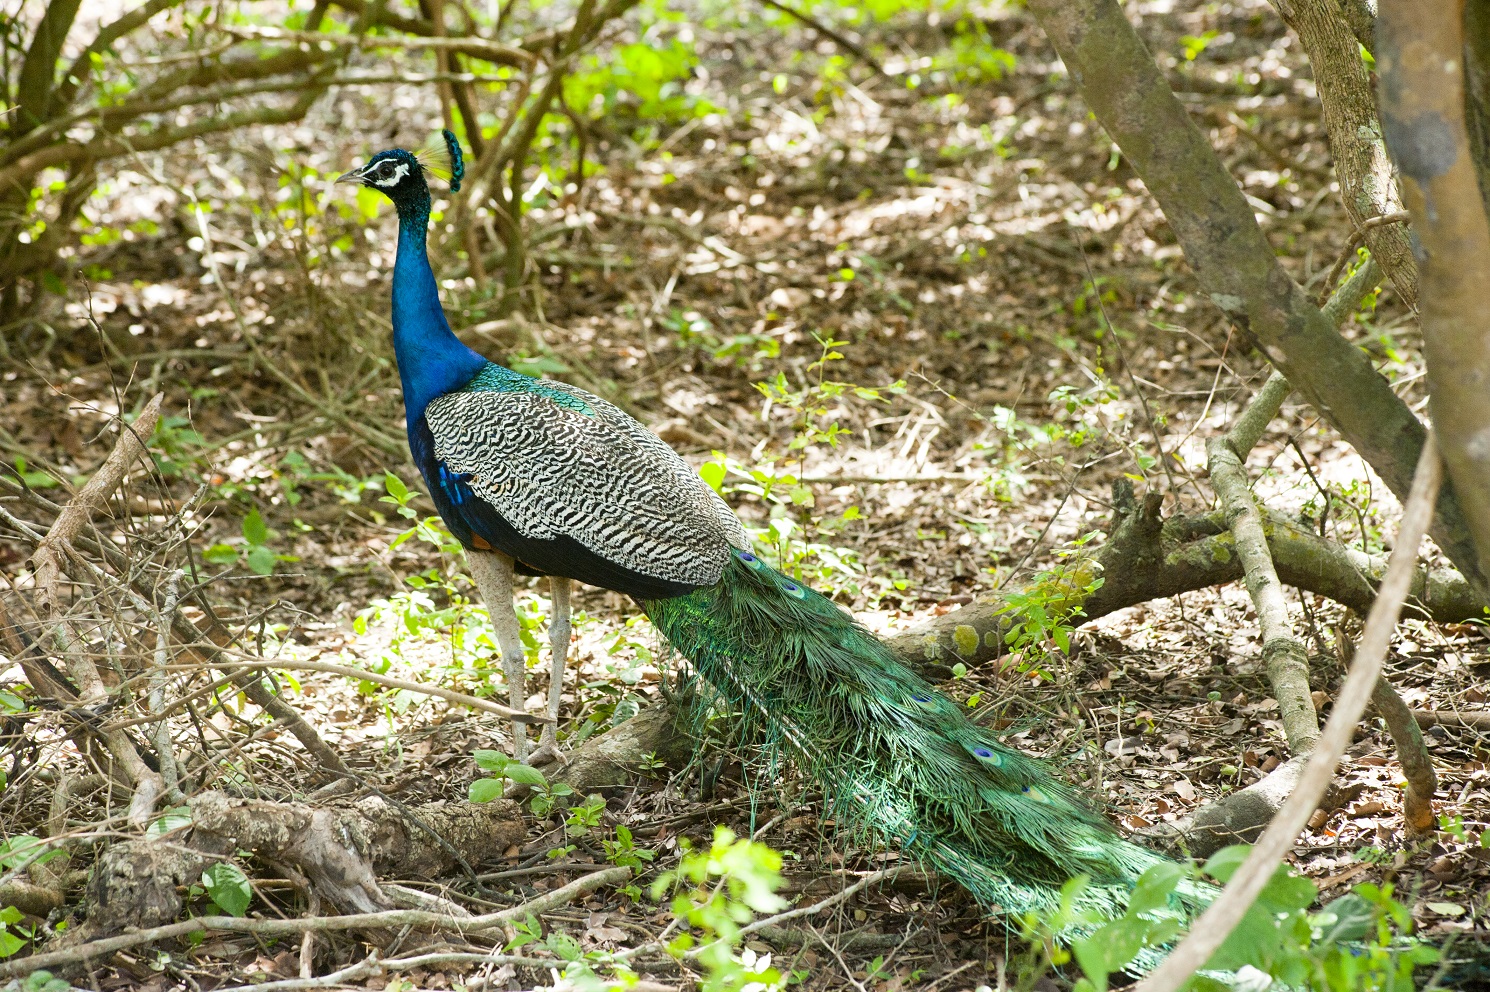 Wild Peacocks sighted across Ontario by our readers